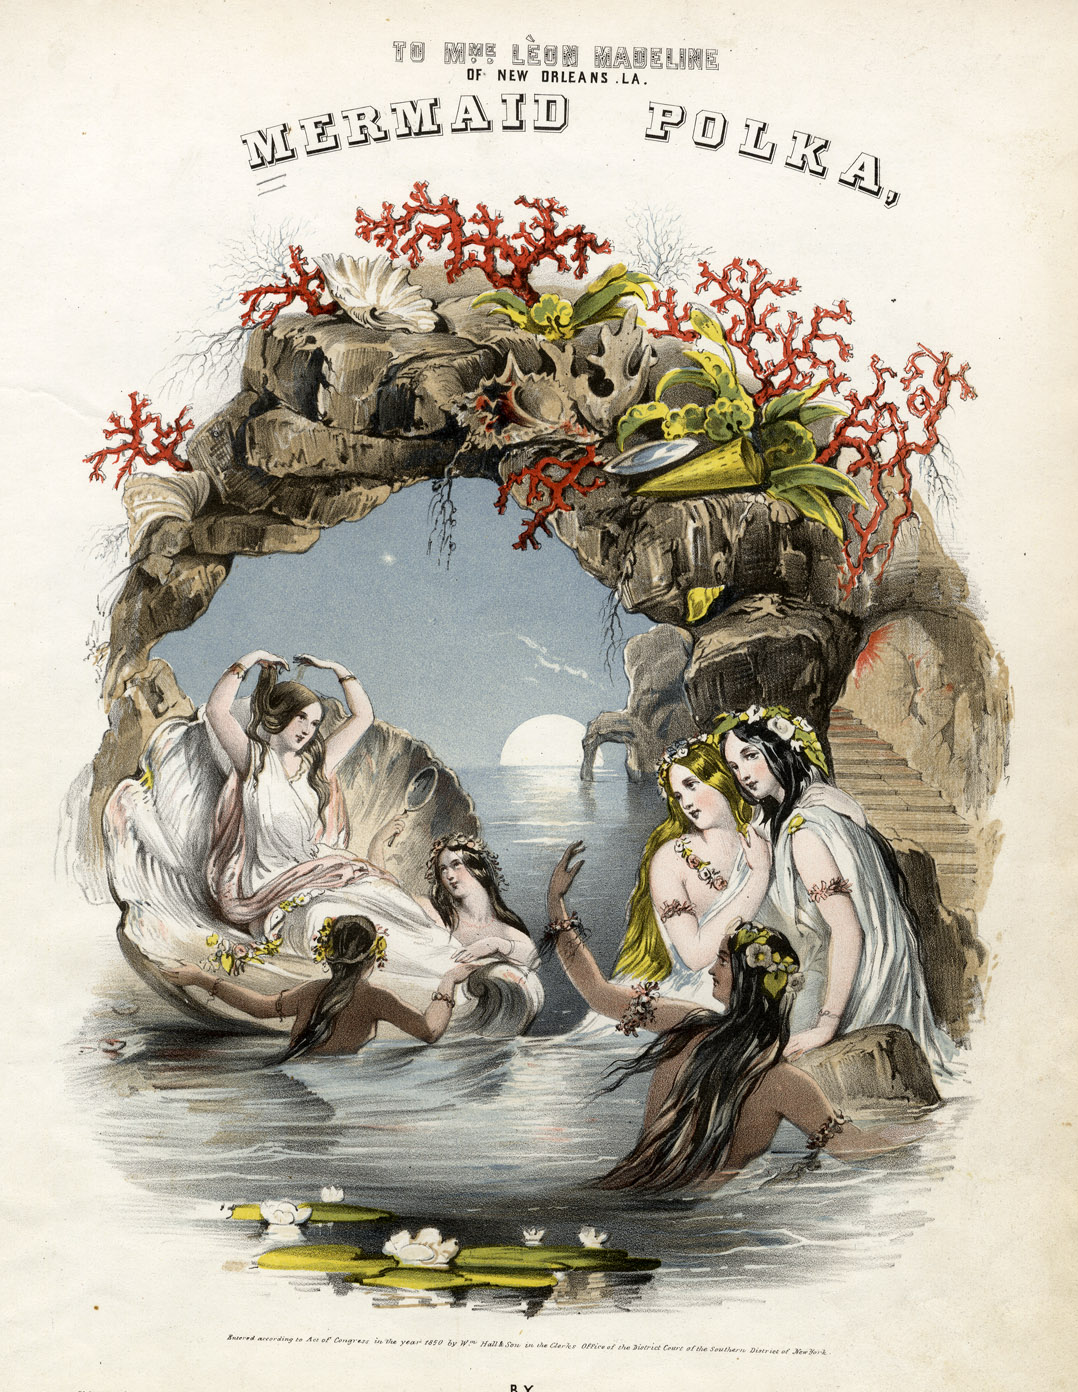 The Mermaid Polka (1850) is just one example of how public fascination with mermaids manifested itself in 19th century art, music, and literature. https://commons.wikimedia.org/wiki/File:Mermaid_Polka_art_1850.jpg